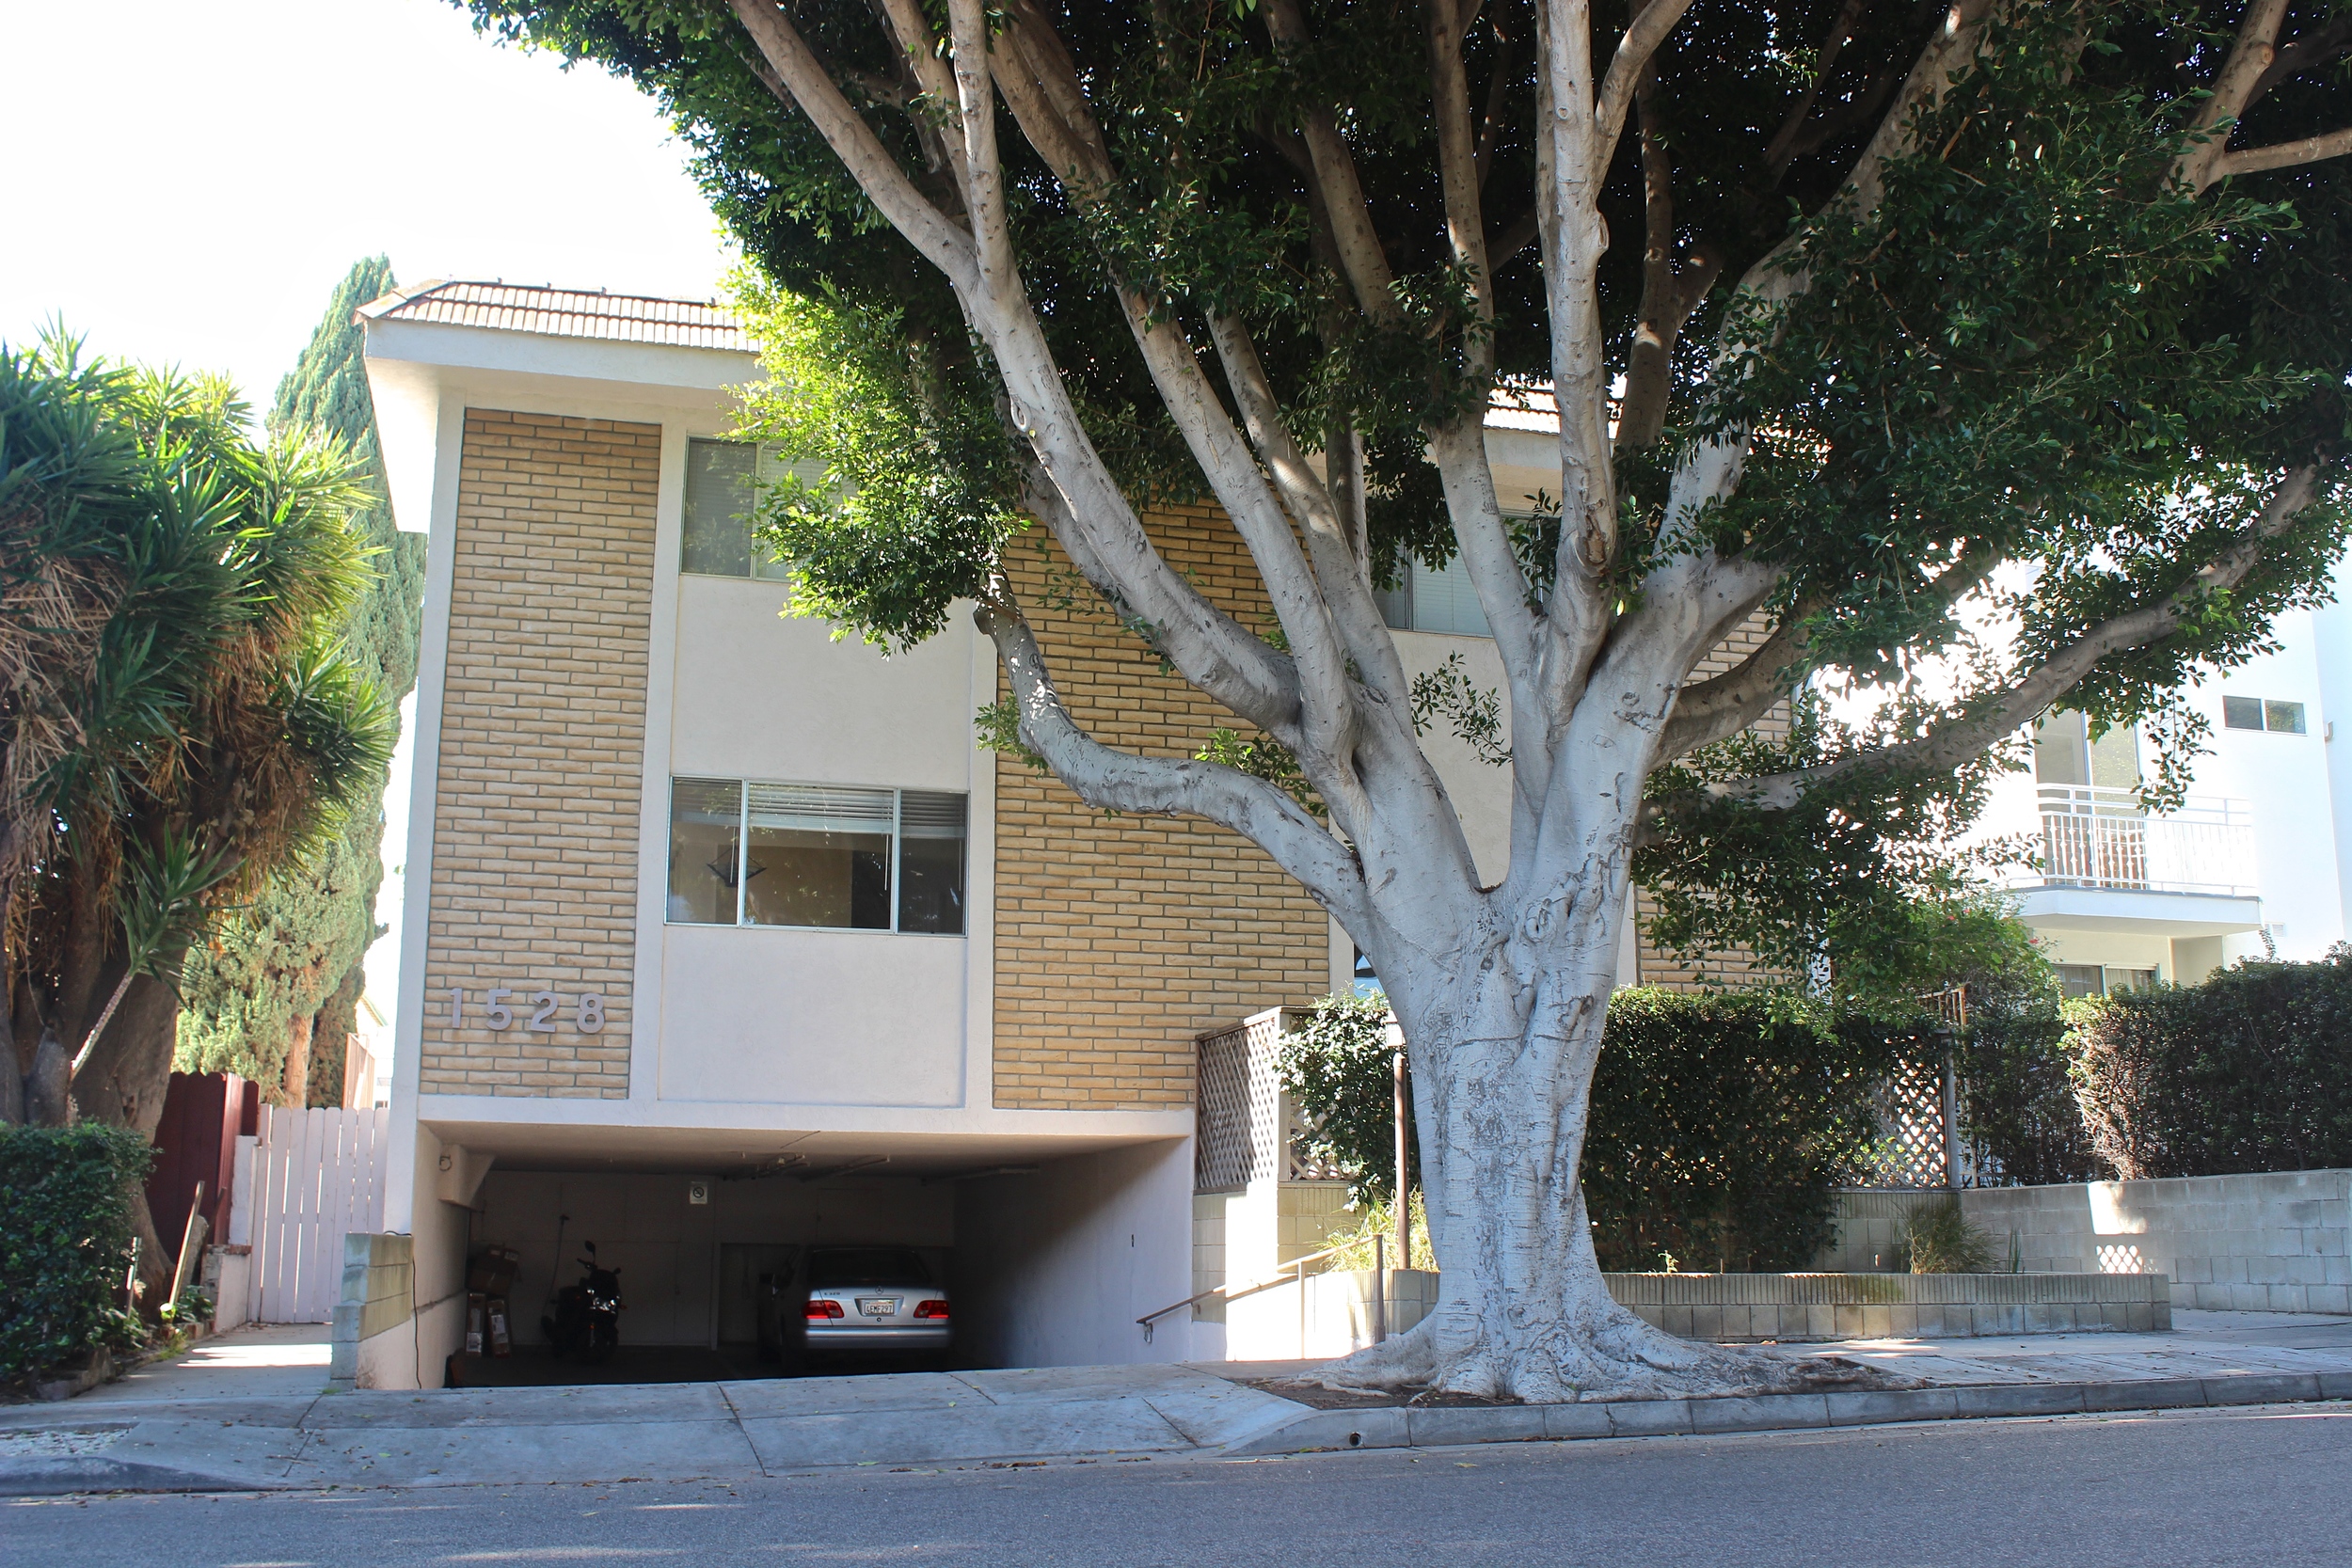 Building with large tree in front obscuring the carport area.